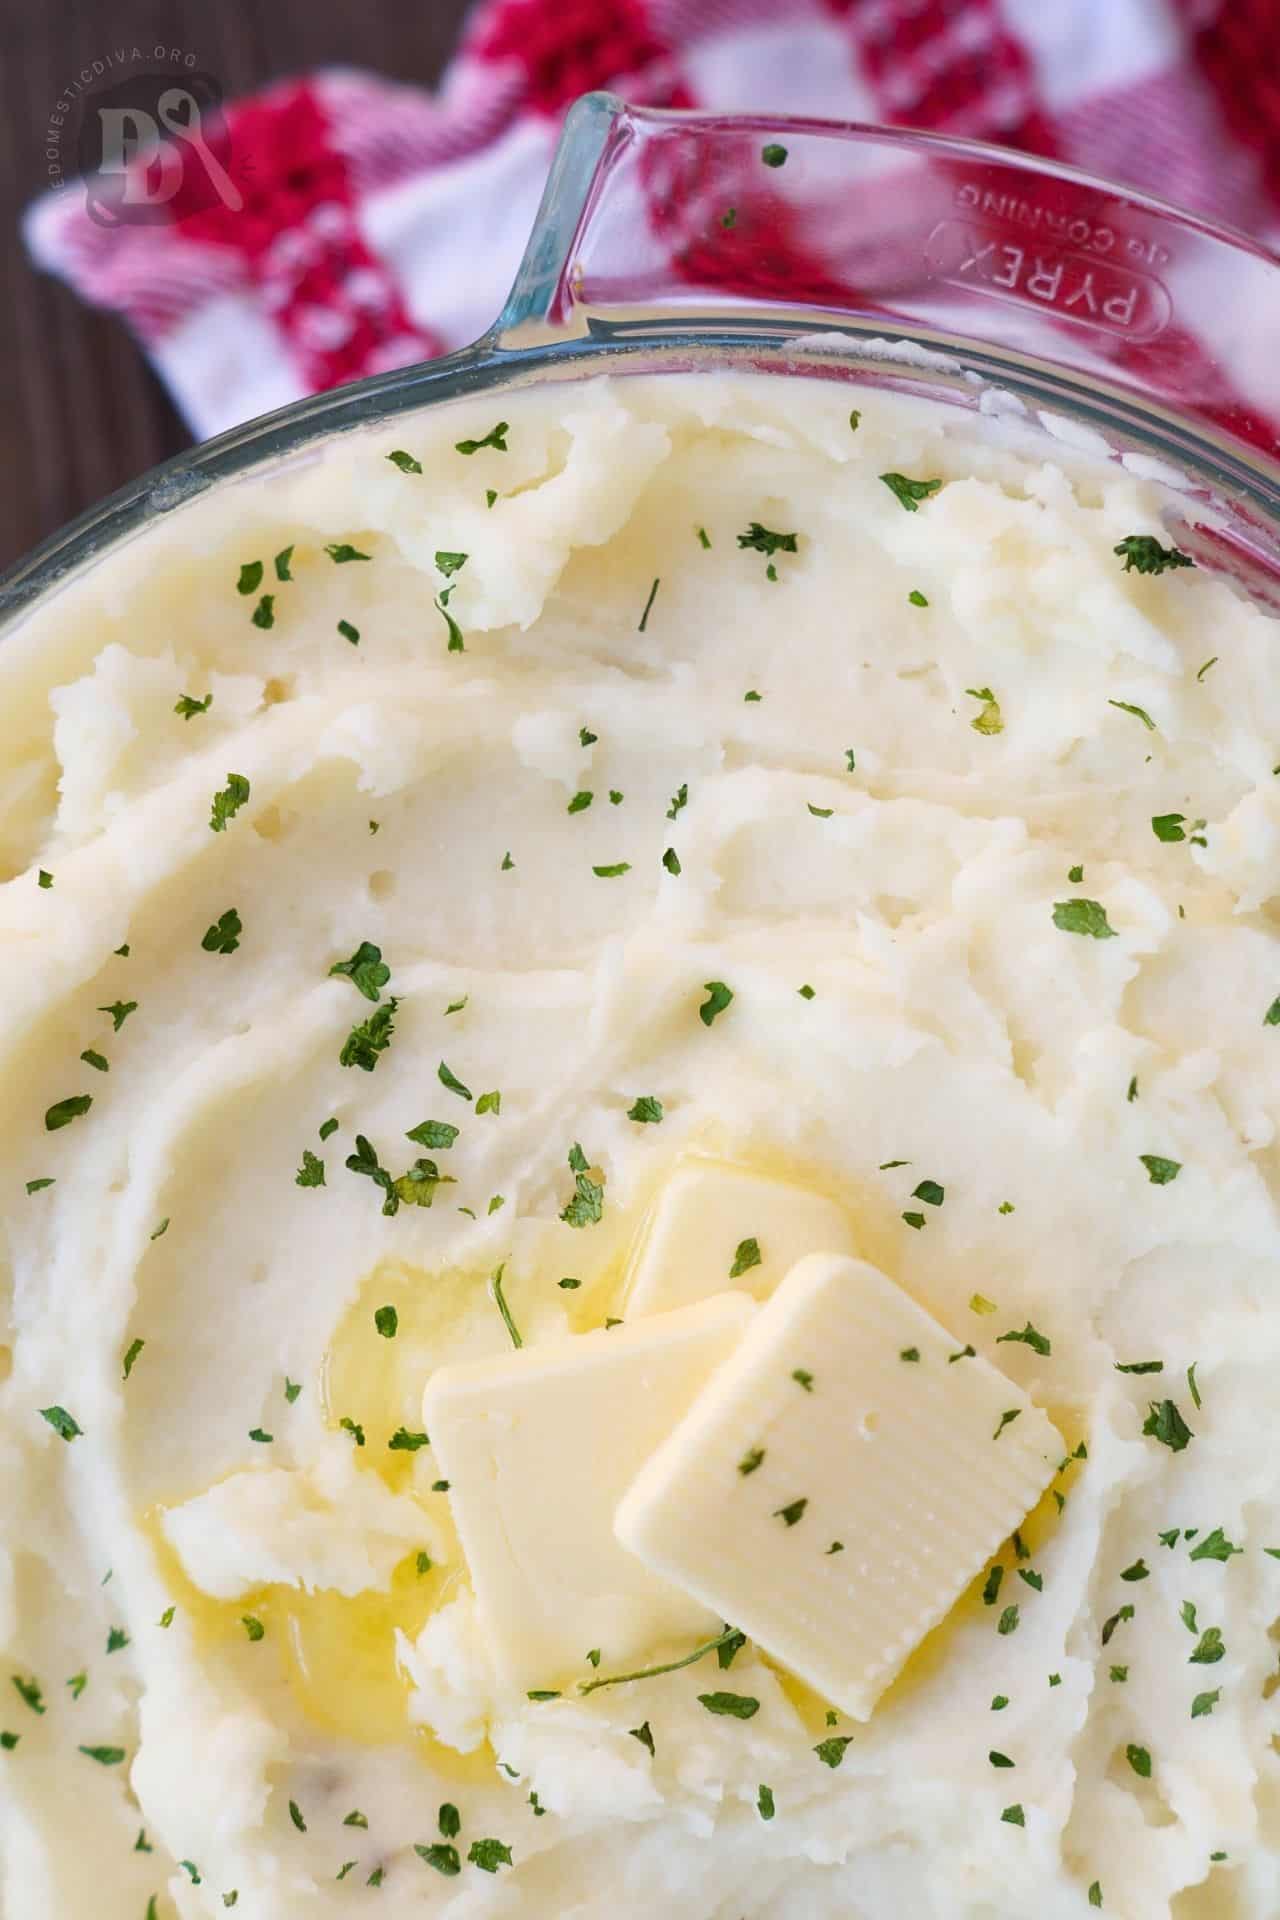 How to make mashed potatoes from scratch - The Domestic Diva